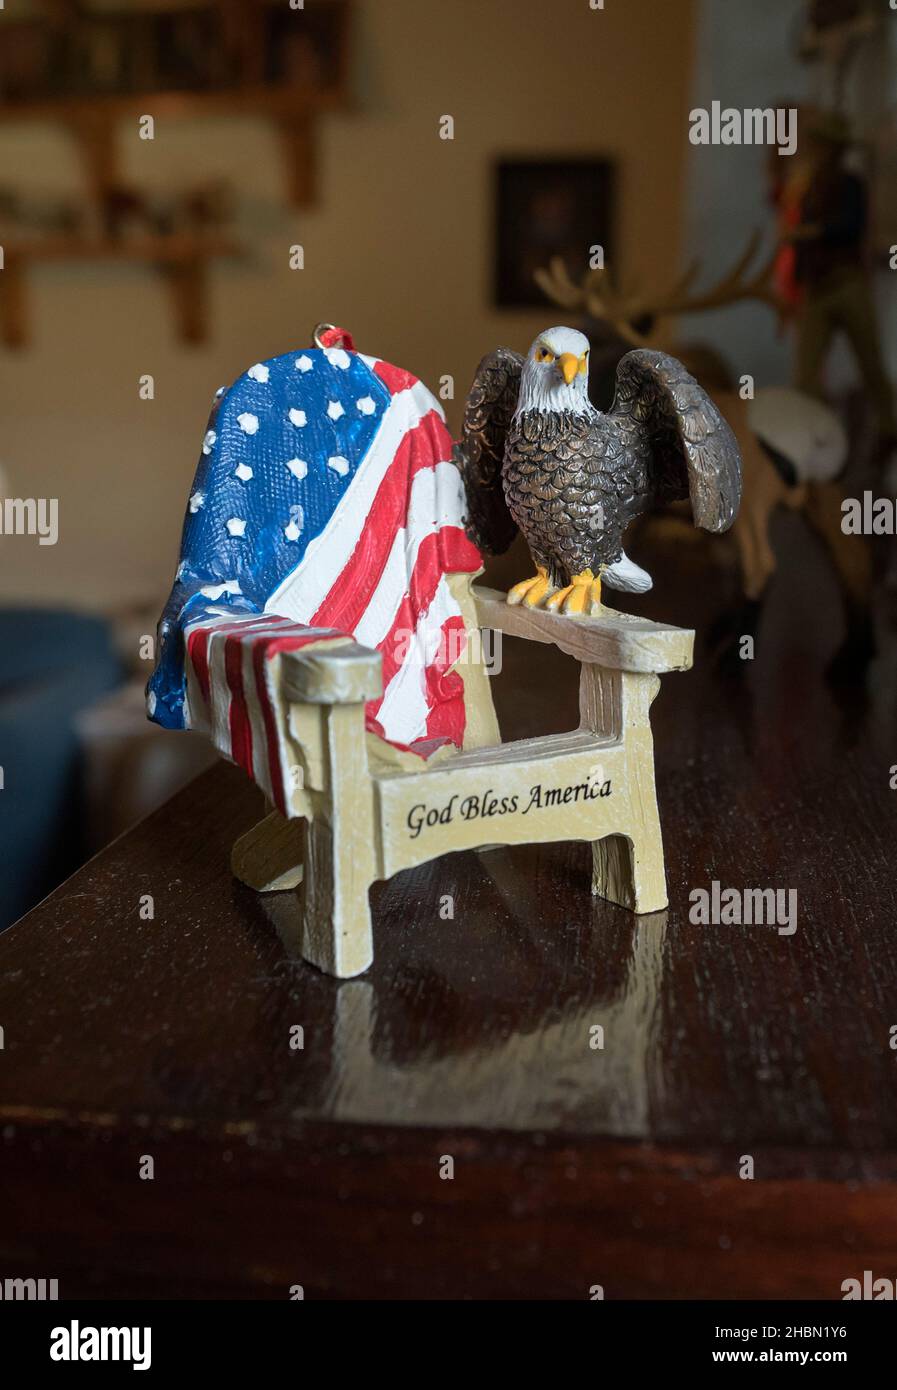 Miniature collection featuring a tiny chair with God Bless America, and an American Flag draped over it and a Bald Eagle standing on the arm. Stock Photo